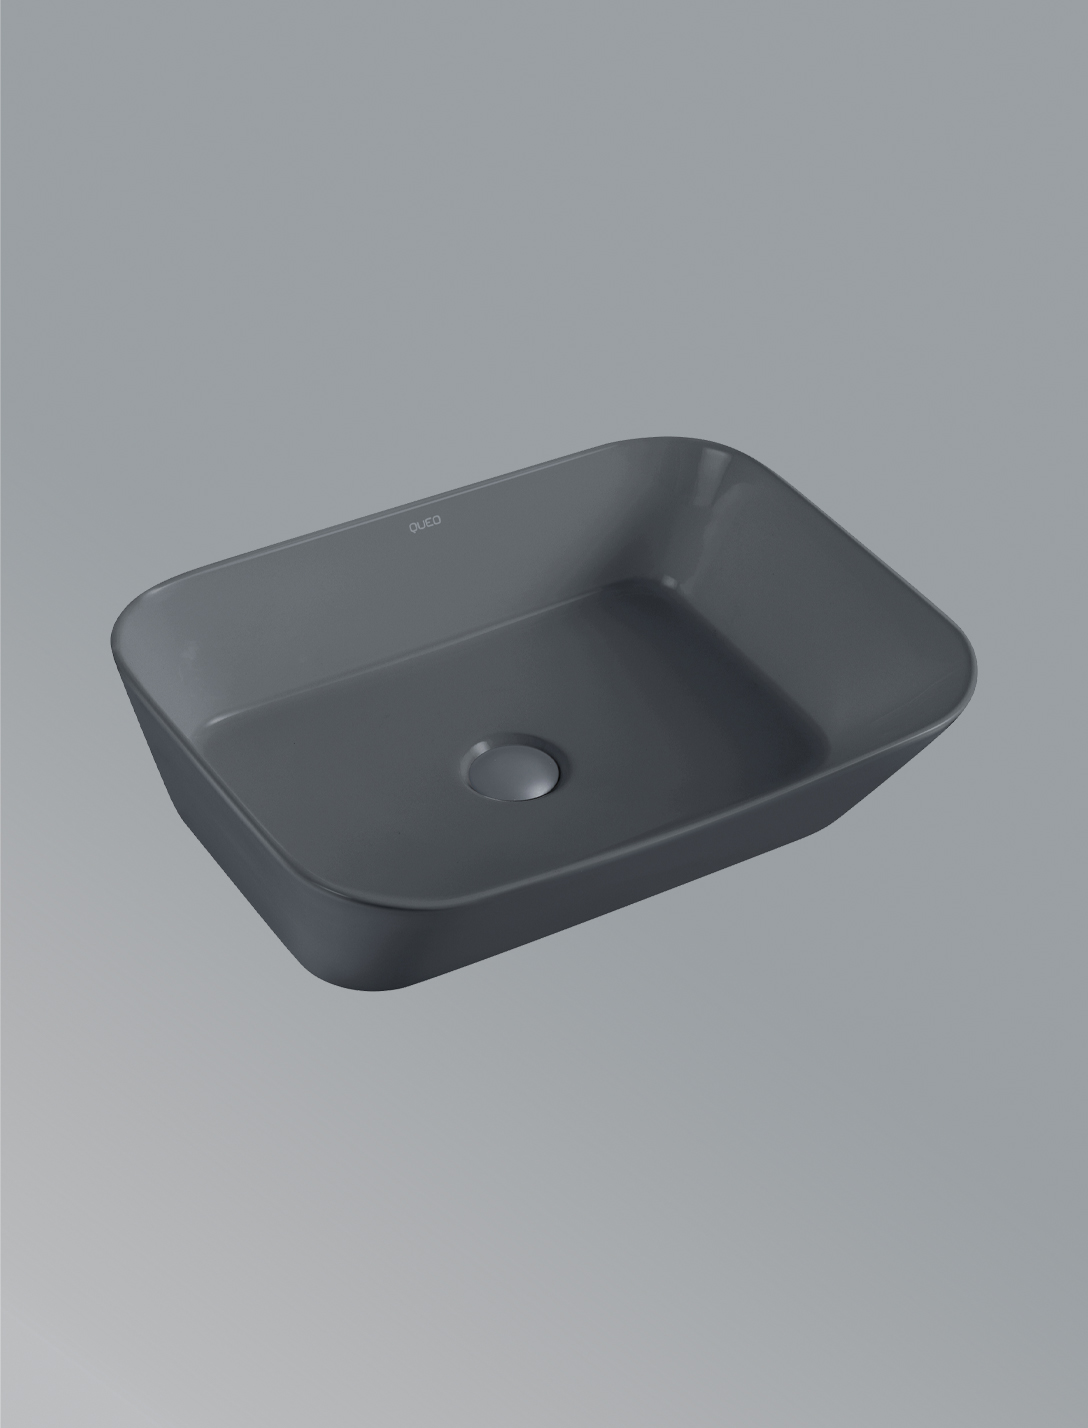 over-the-counter-basin-without-faucet-hole-in-matt-grey